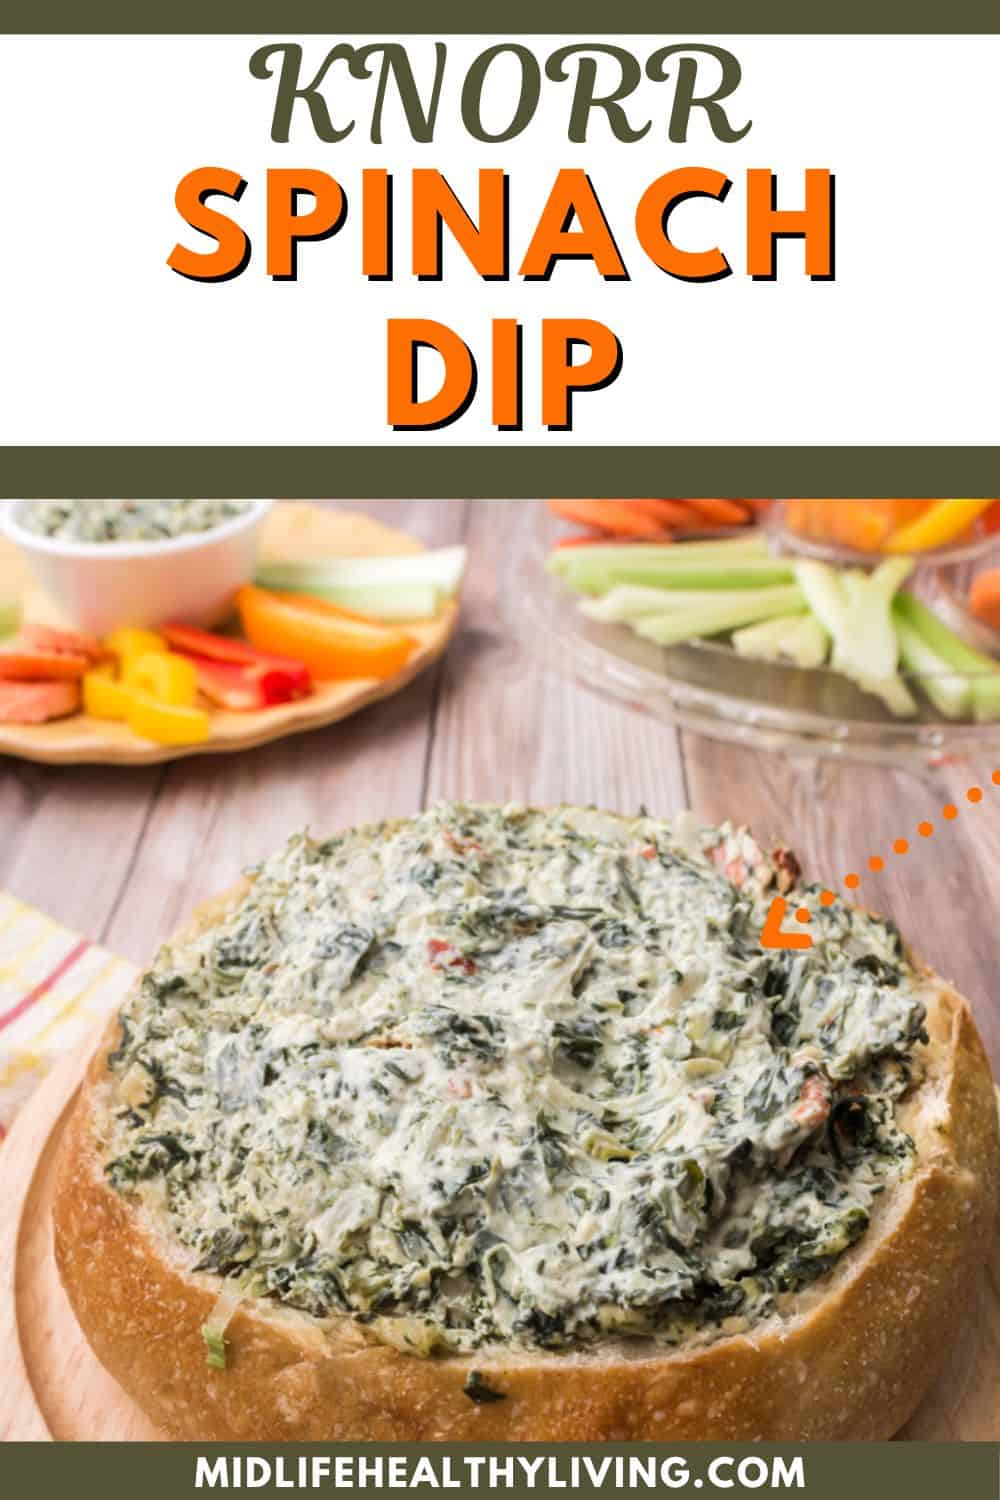 Pinterest image for Spinach dip.